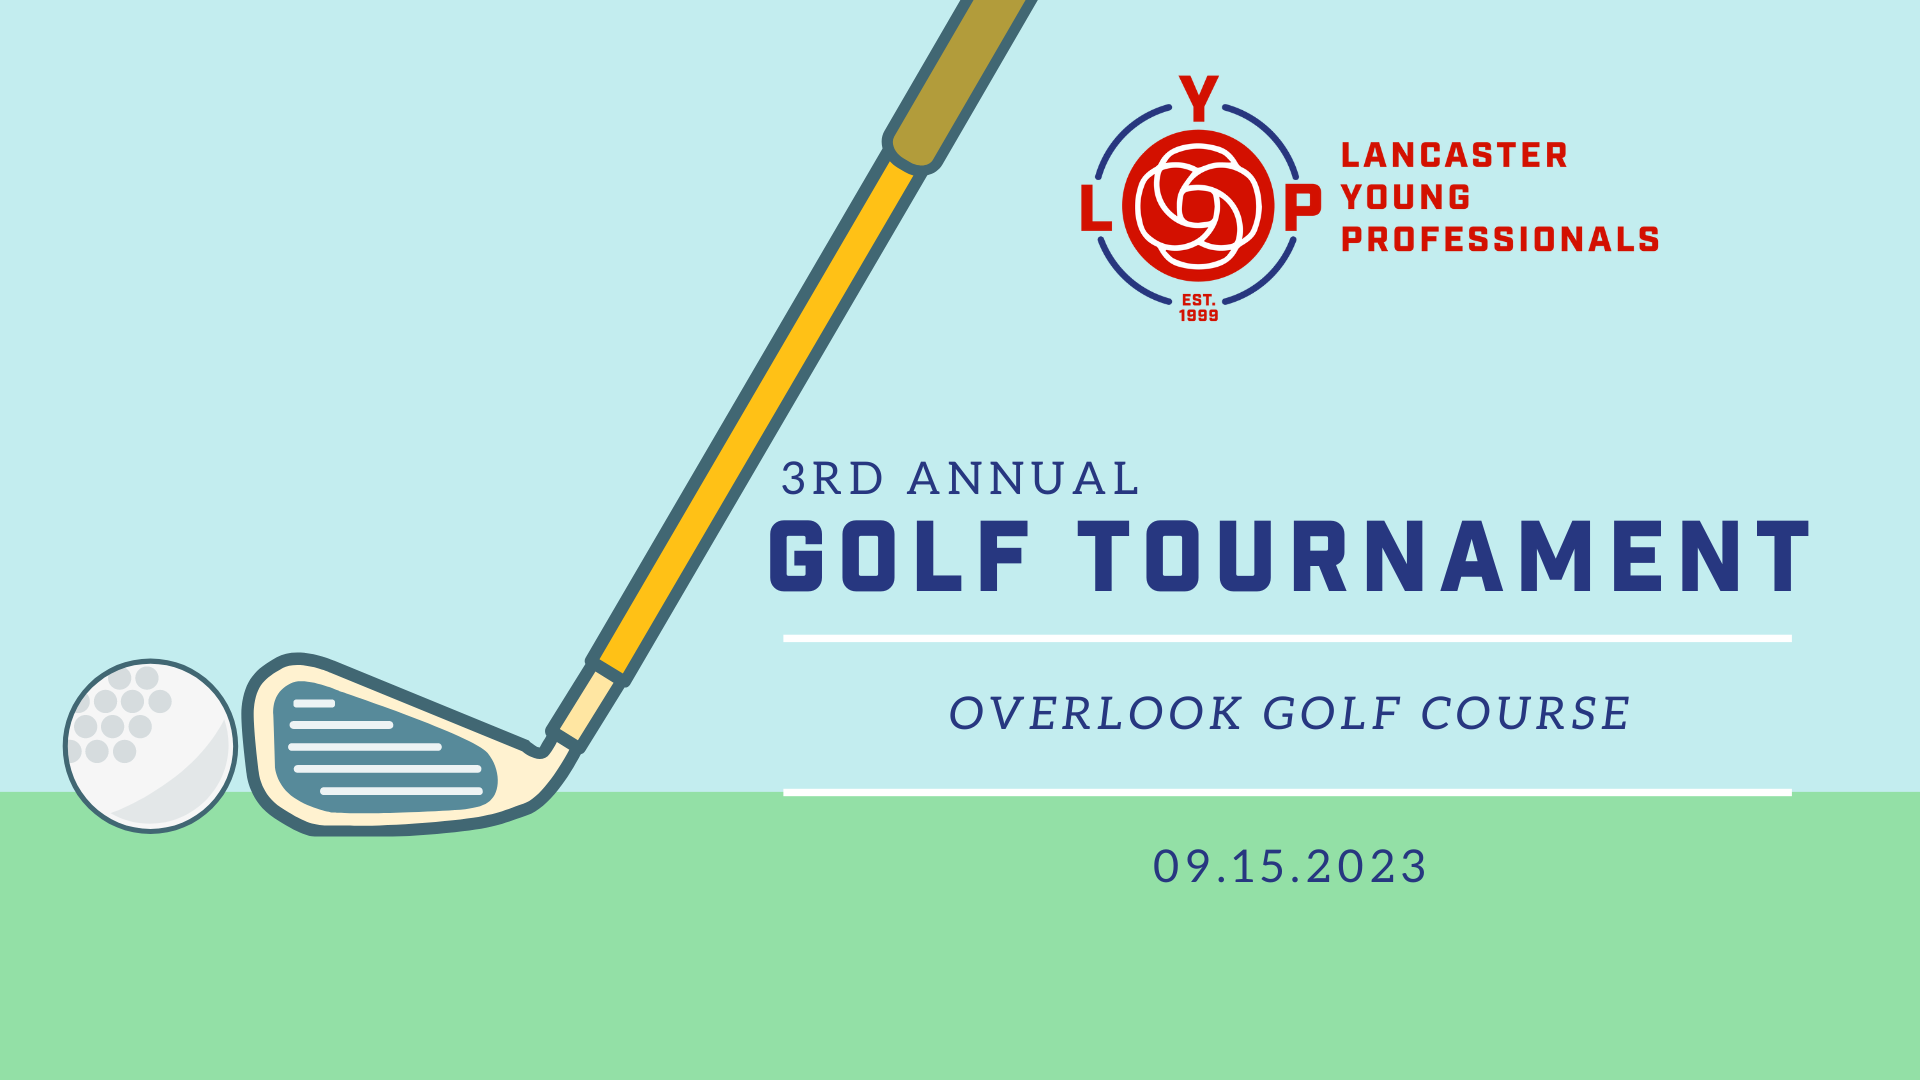 LYP Golf Outing 2023